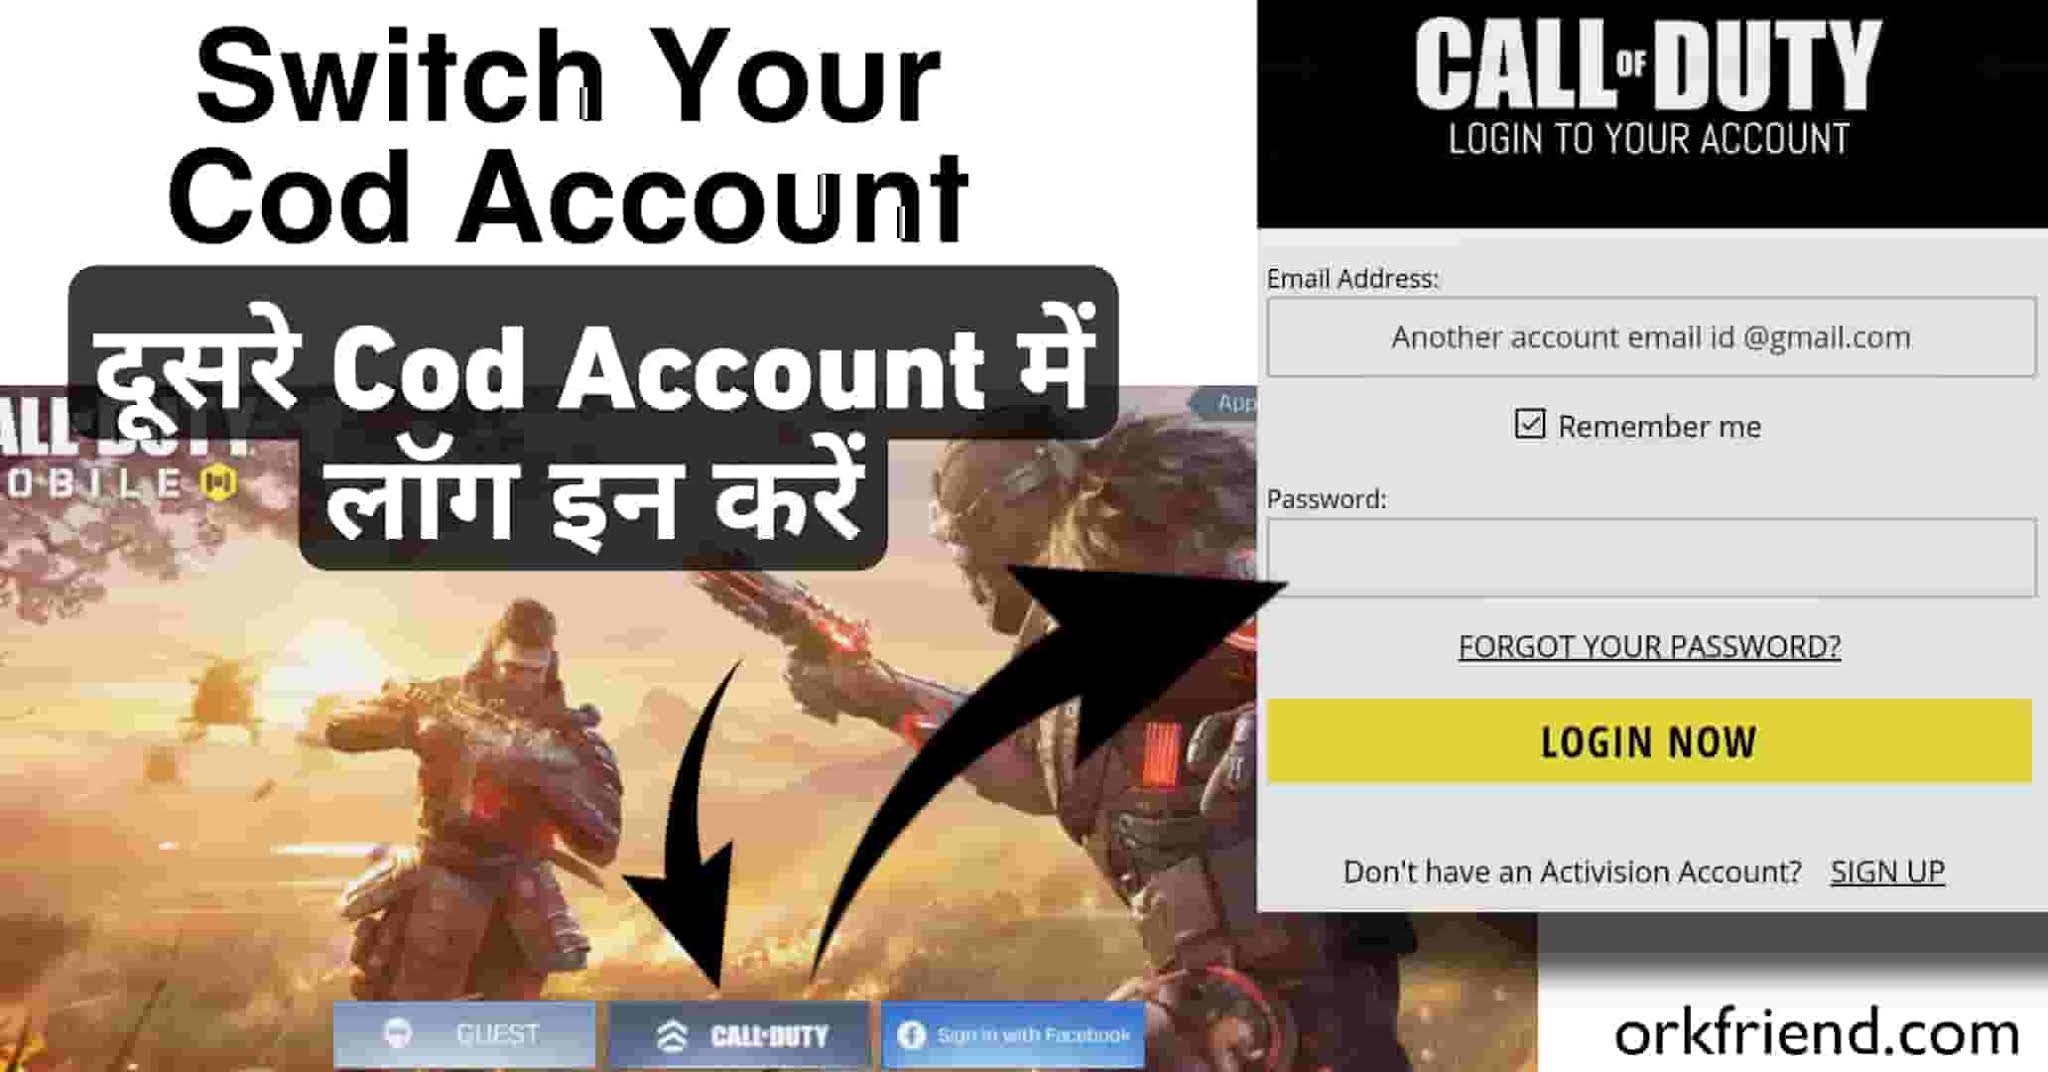 How-To-Log-In-Another-Cod-Account-In-Call-Of-Duty-Mobile-Hindi-how-to-switch-account-in-call-of-duty-mobile-Hindi.